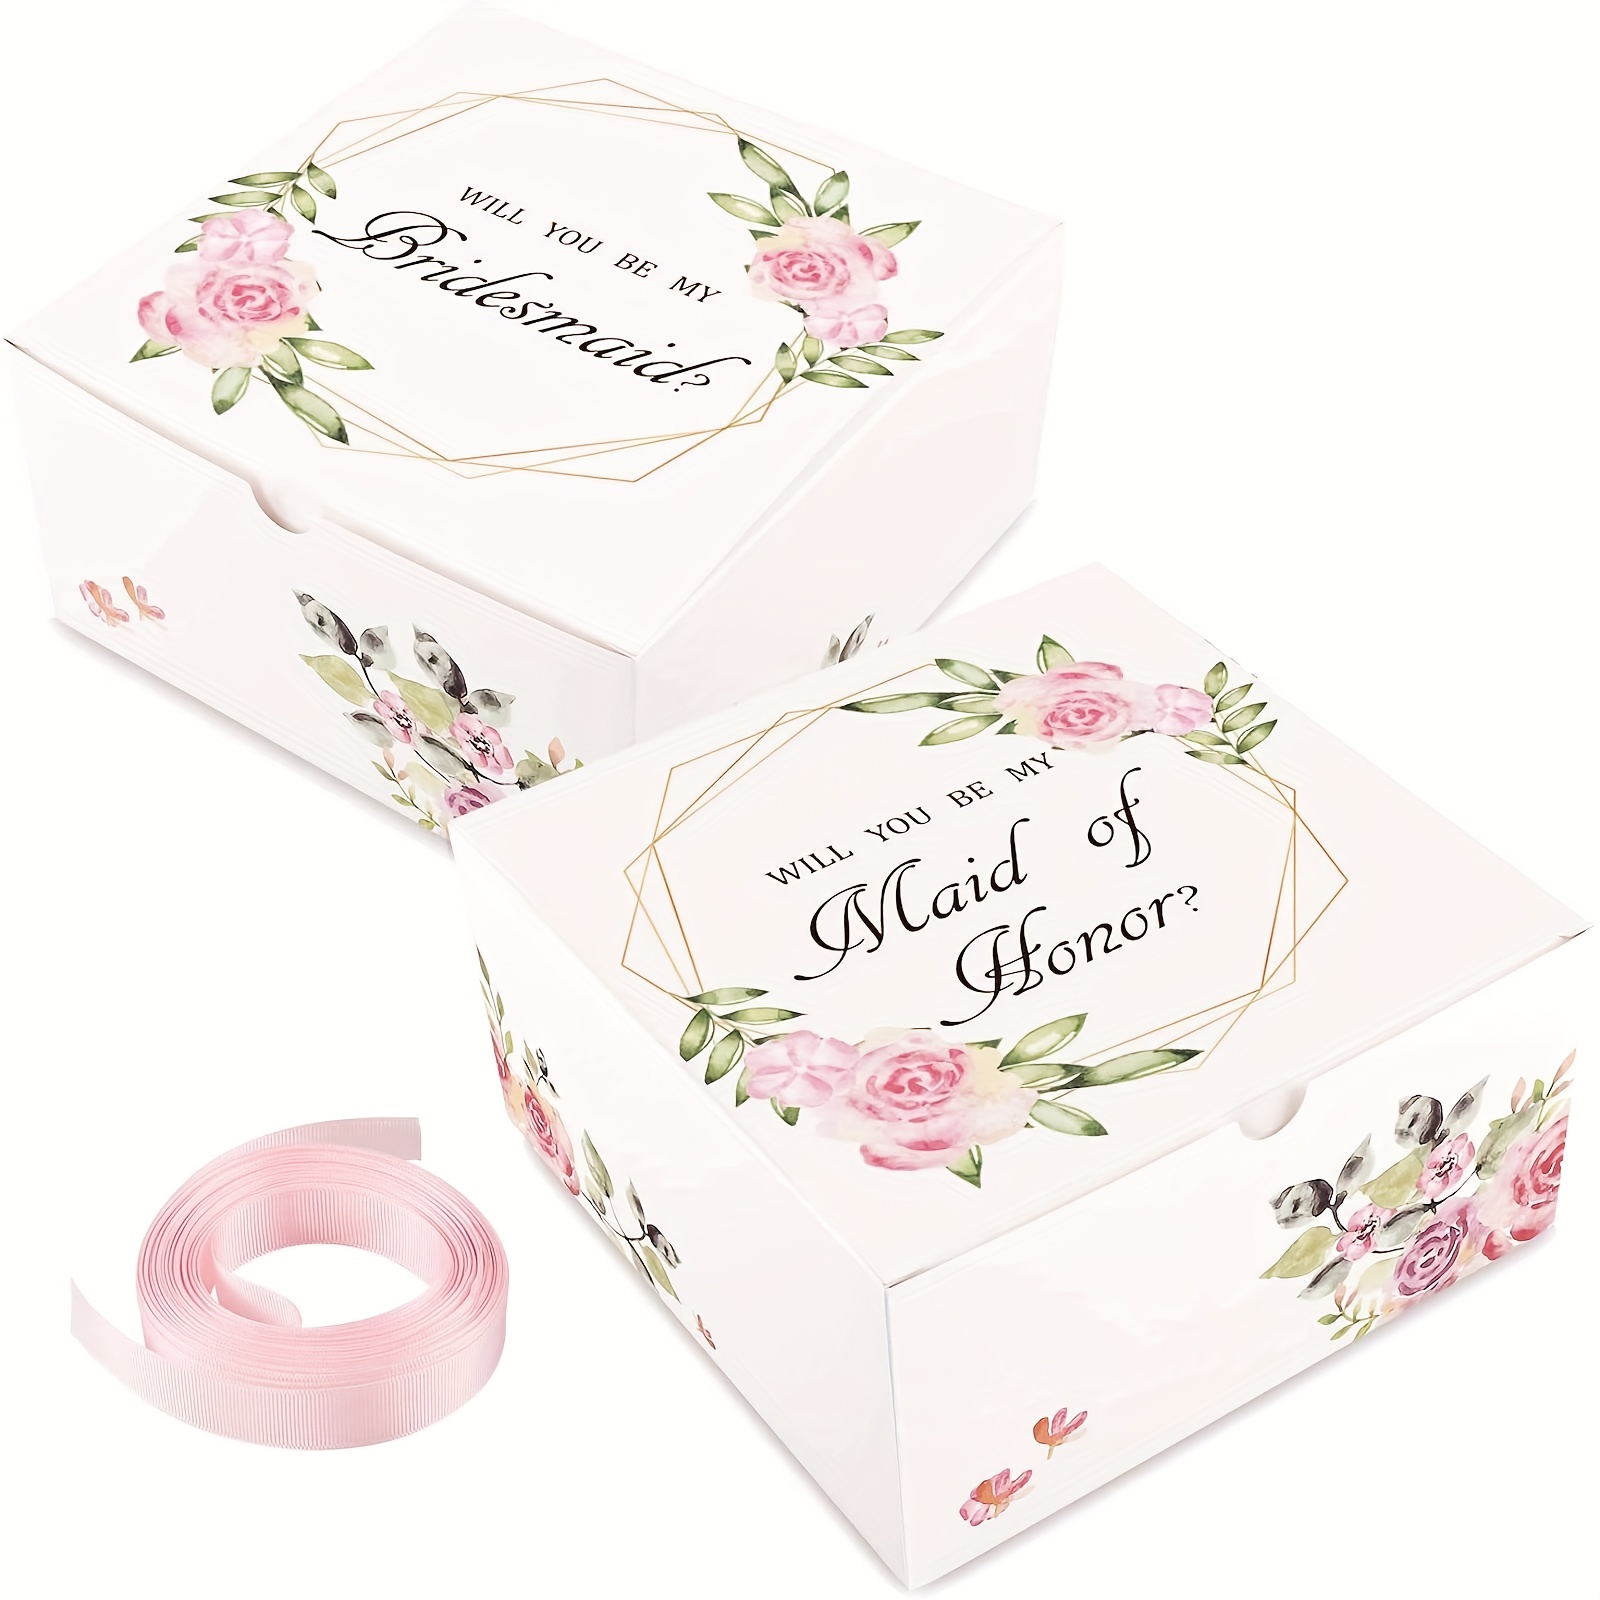 Coume 63 Pcs Bride Proposal Gifts Bridesmaid Gifts Maid of Honor